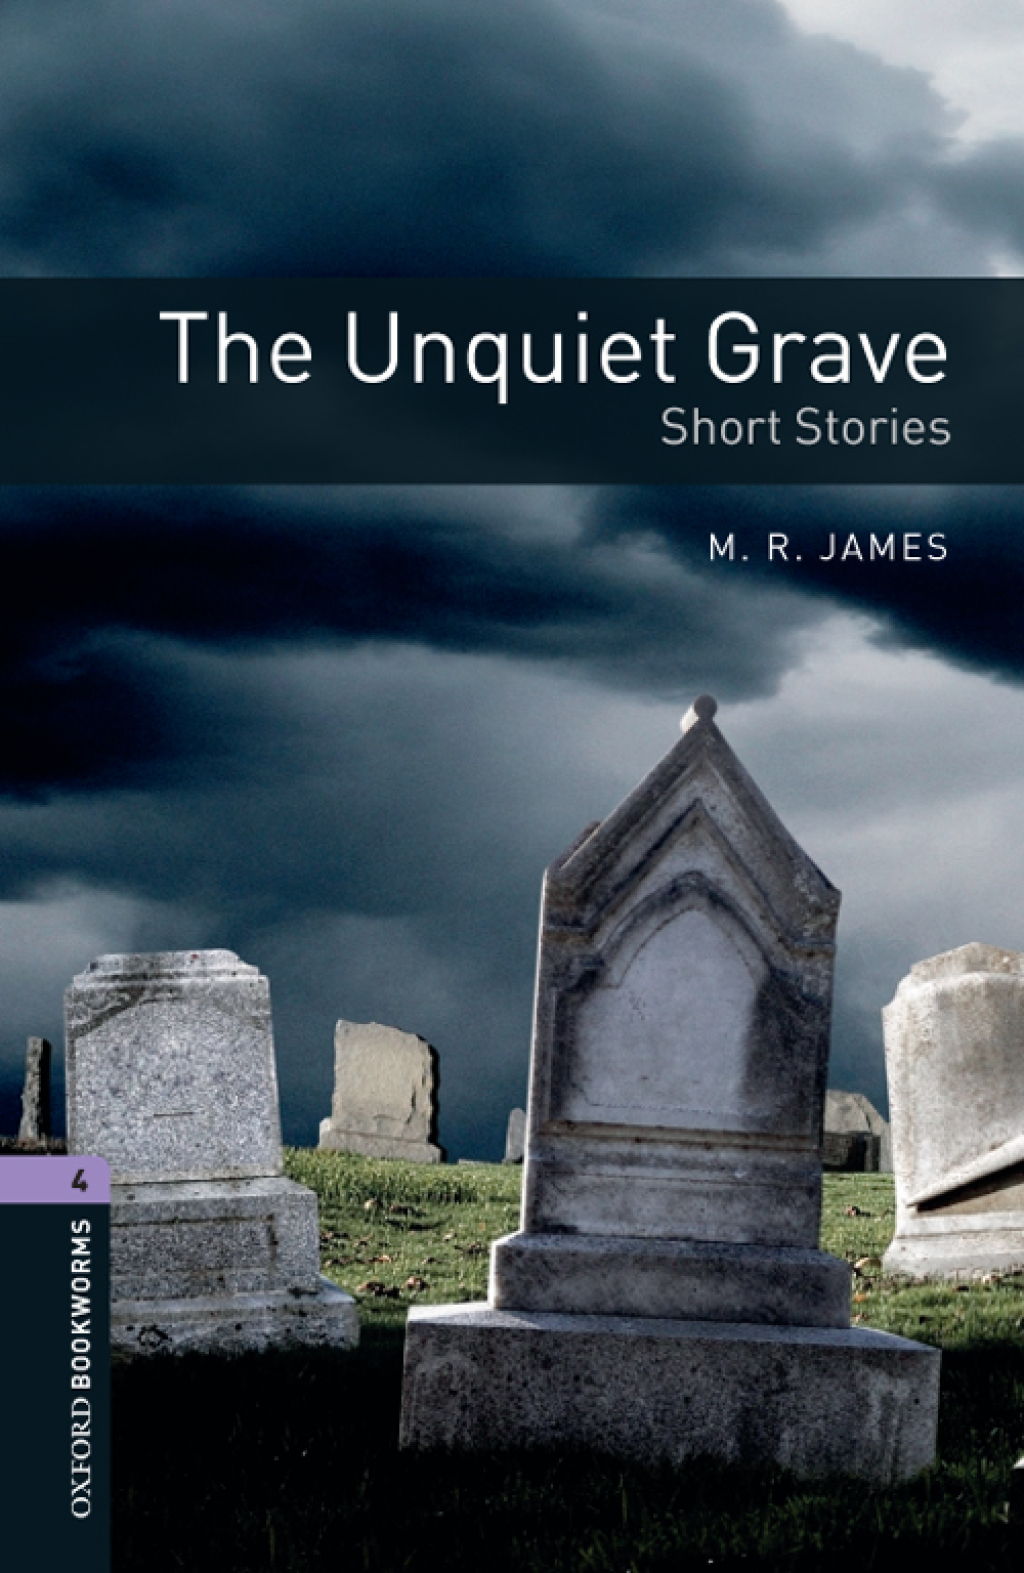 The Unquiet Grave - Short Stories Level 4 Oxford Bookworms Library - 3rd Edition (eBook Rental)